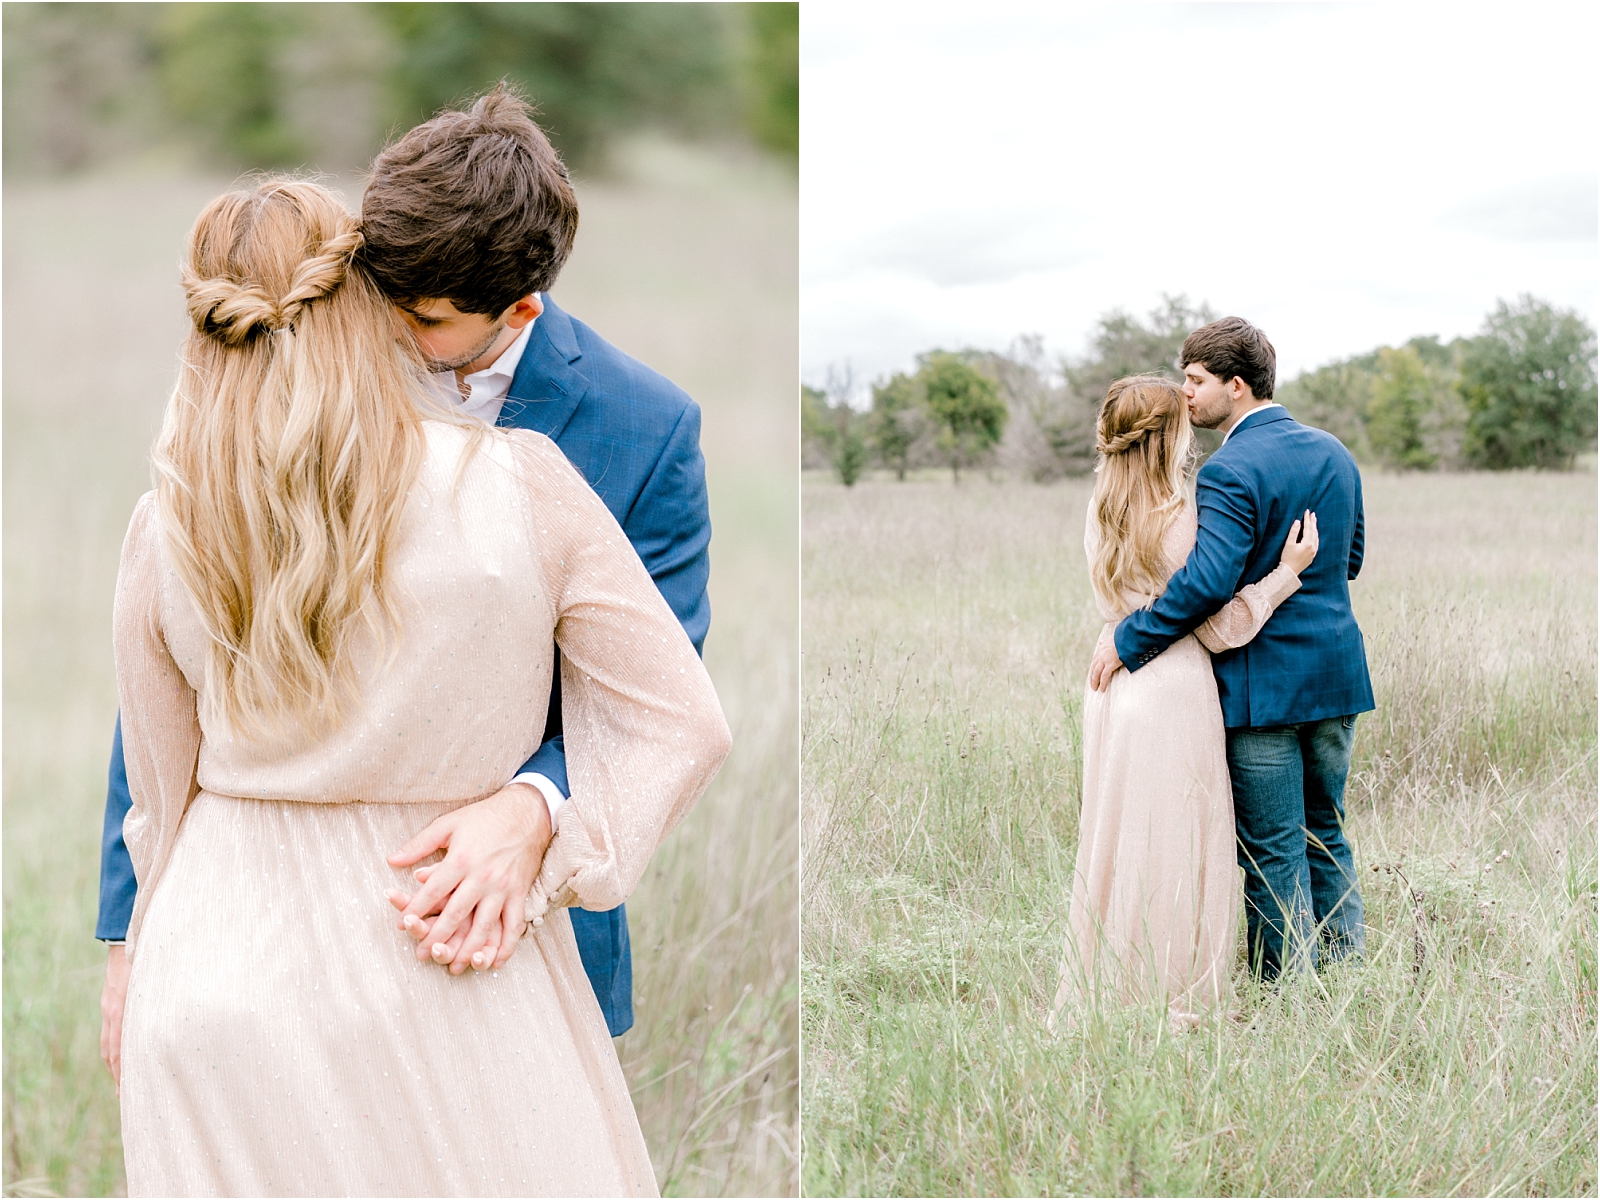 Engagement session at Lady Bird Johnson Wildflower Center